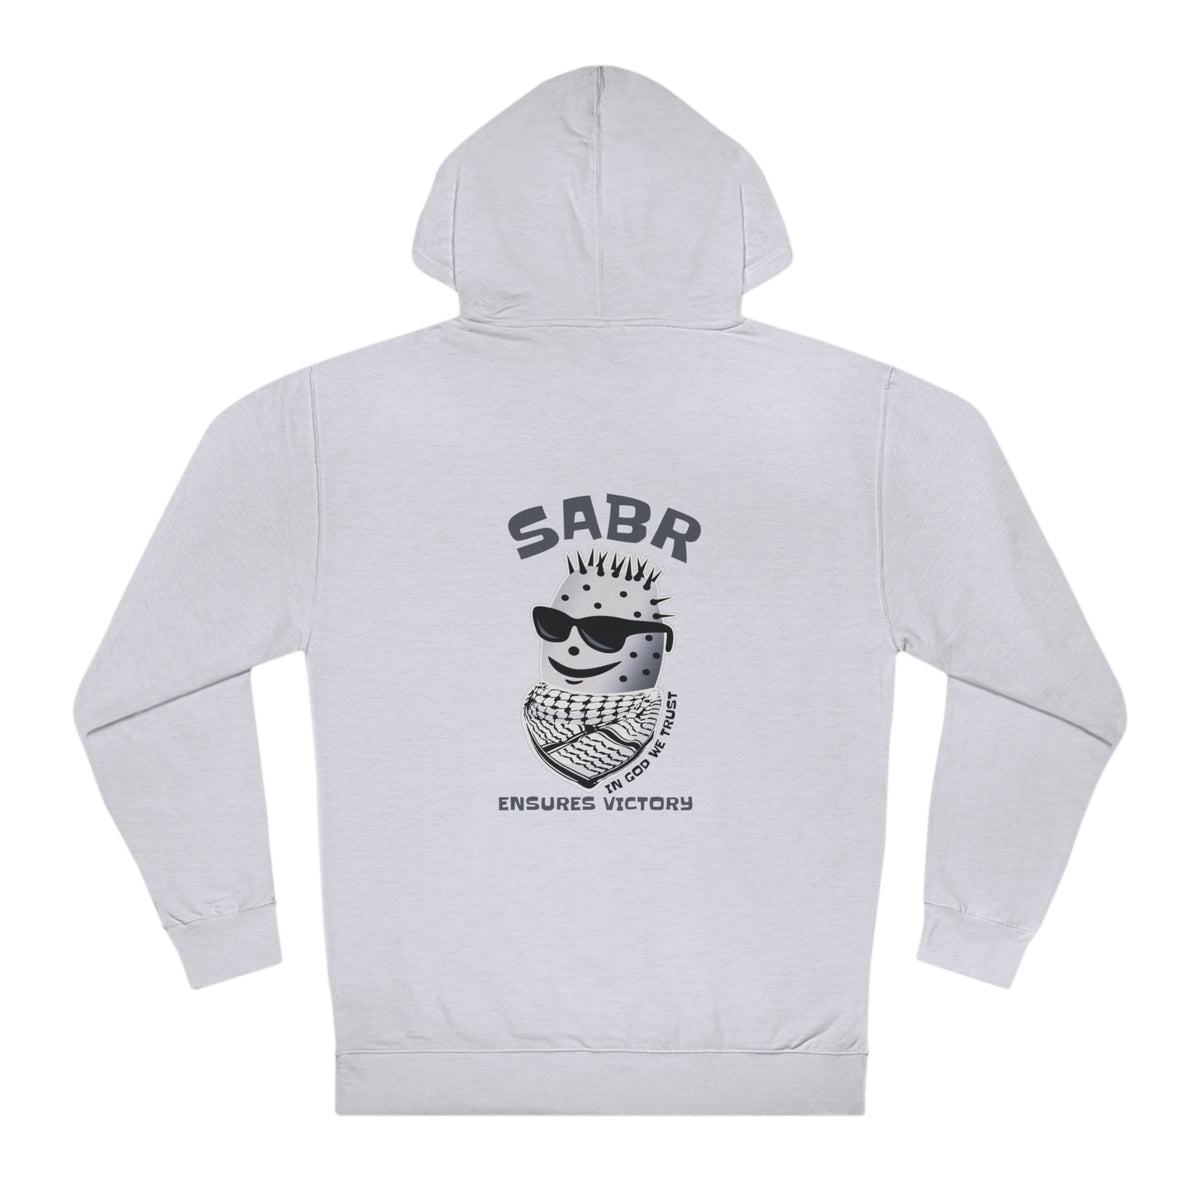 Palestinian Sabr LGY GY Med Hoodies